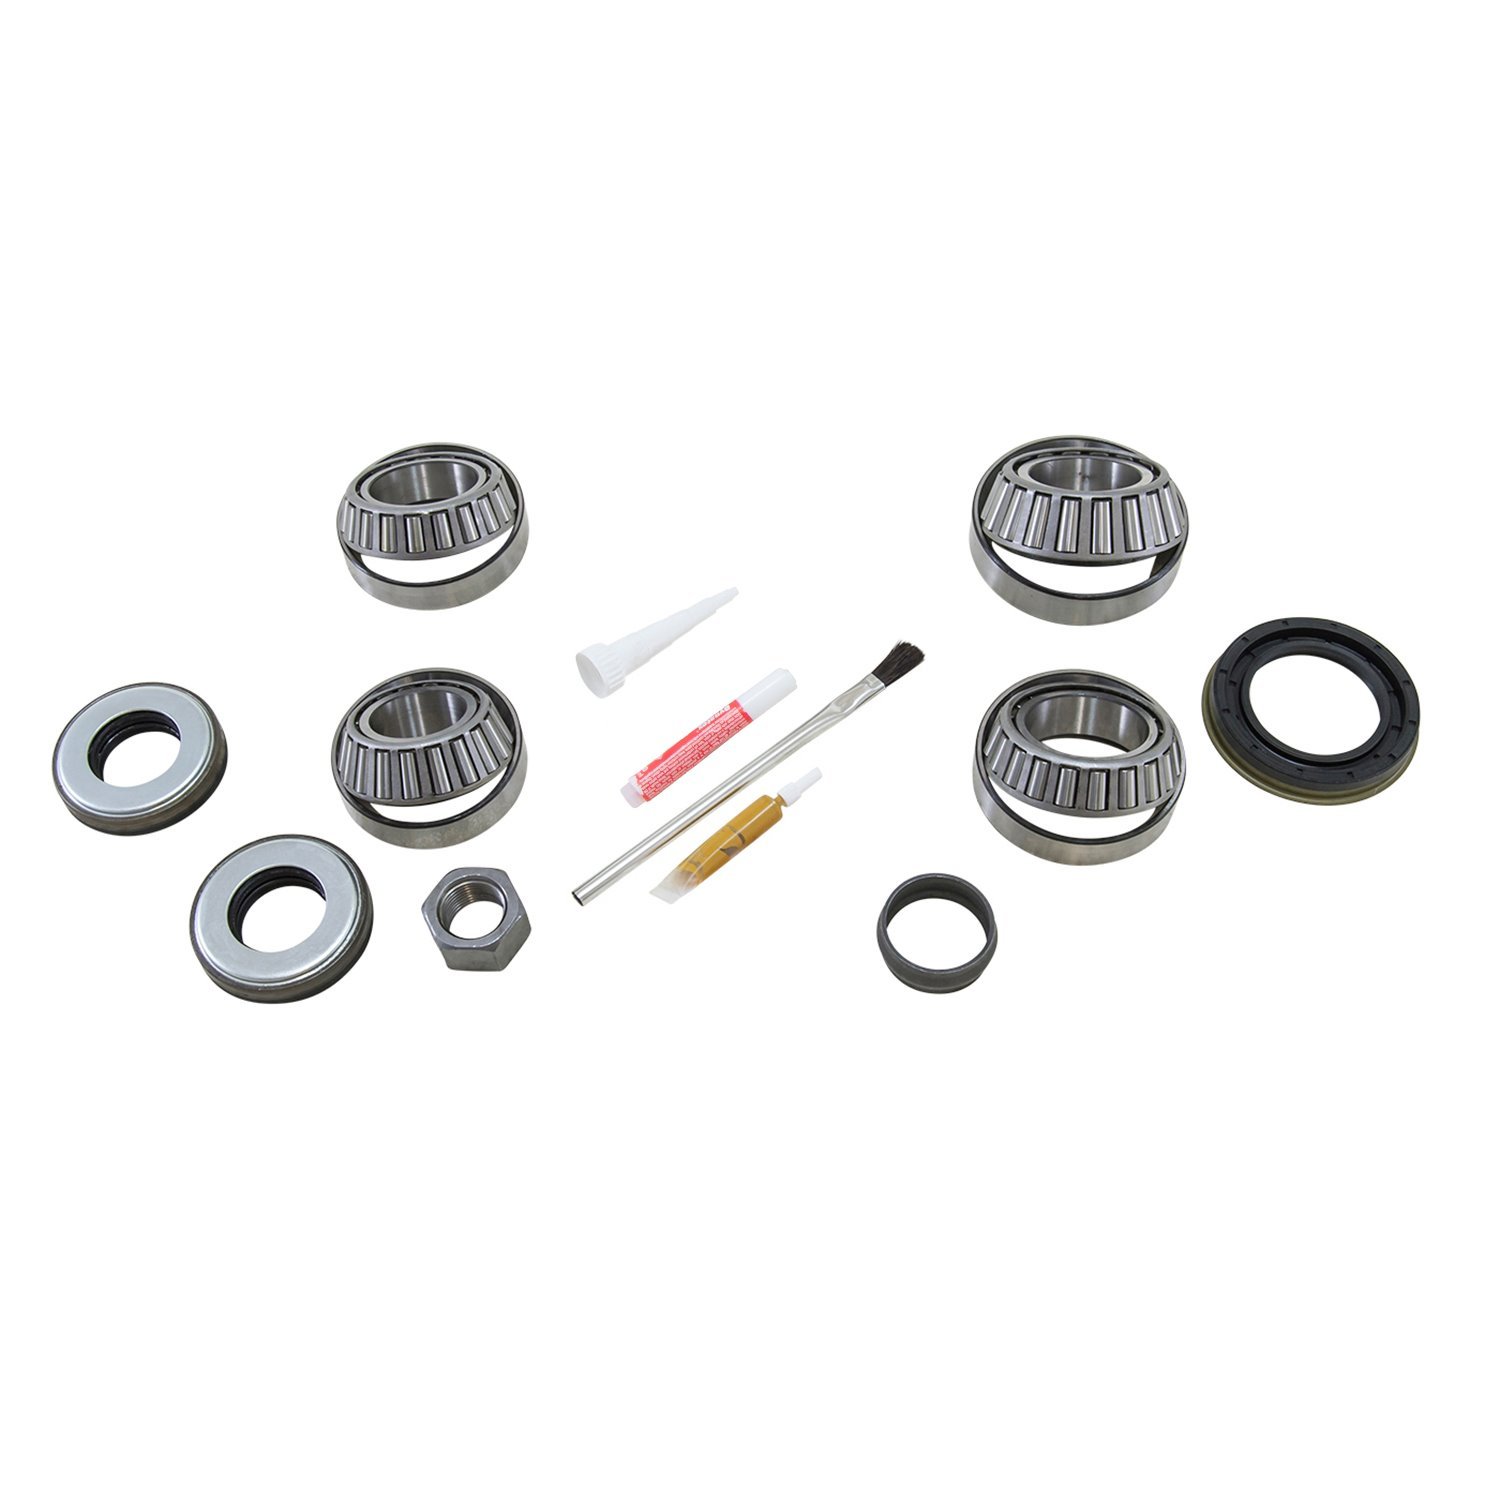 USA Standard 58024 Bearing Kit, For '11 & Up GM 9.25 in. Ifs Front.